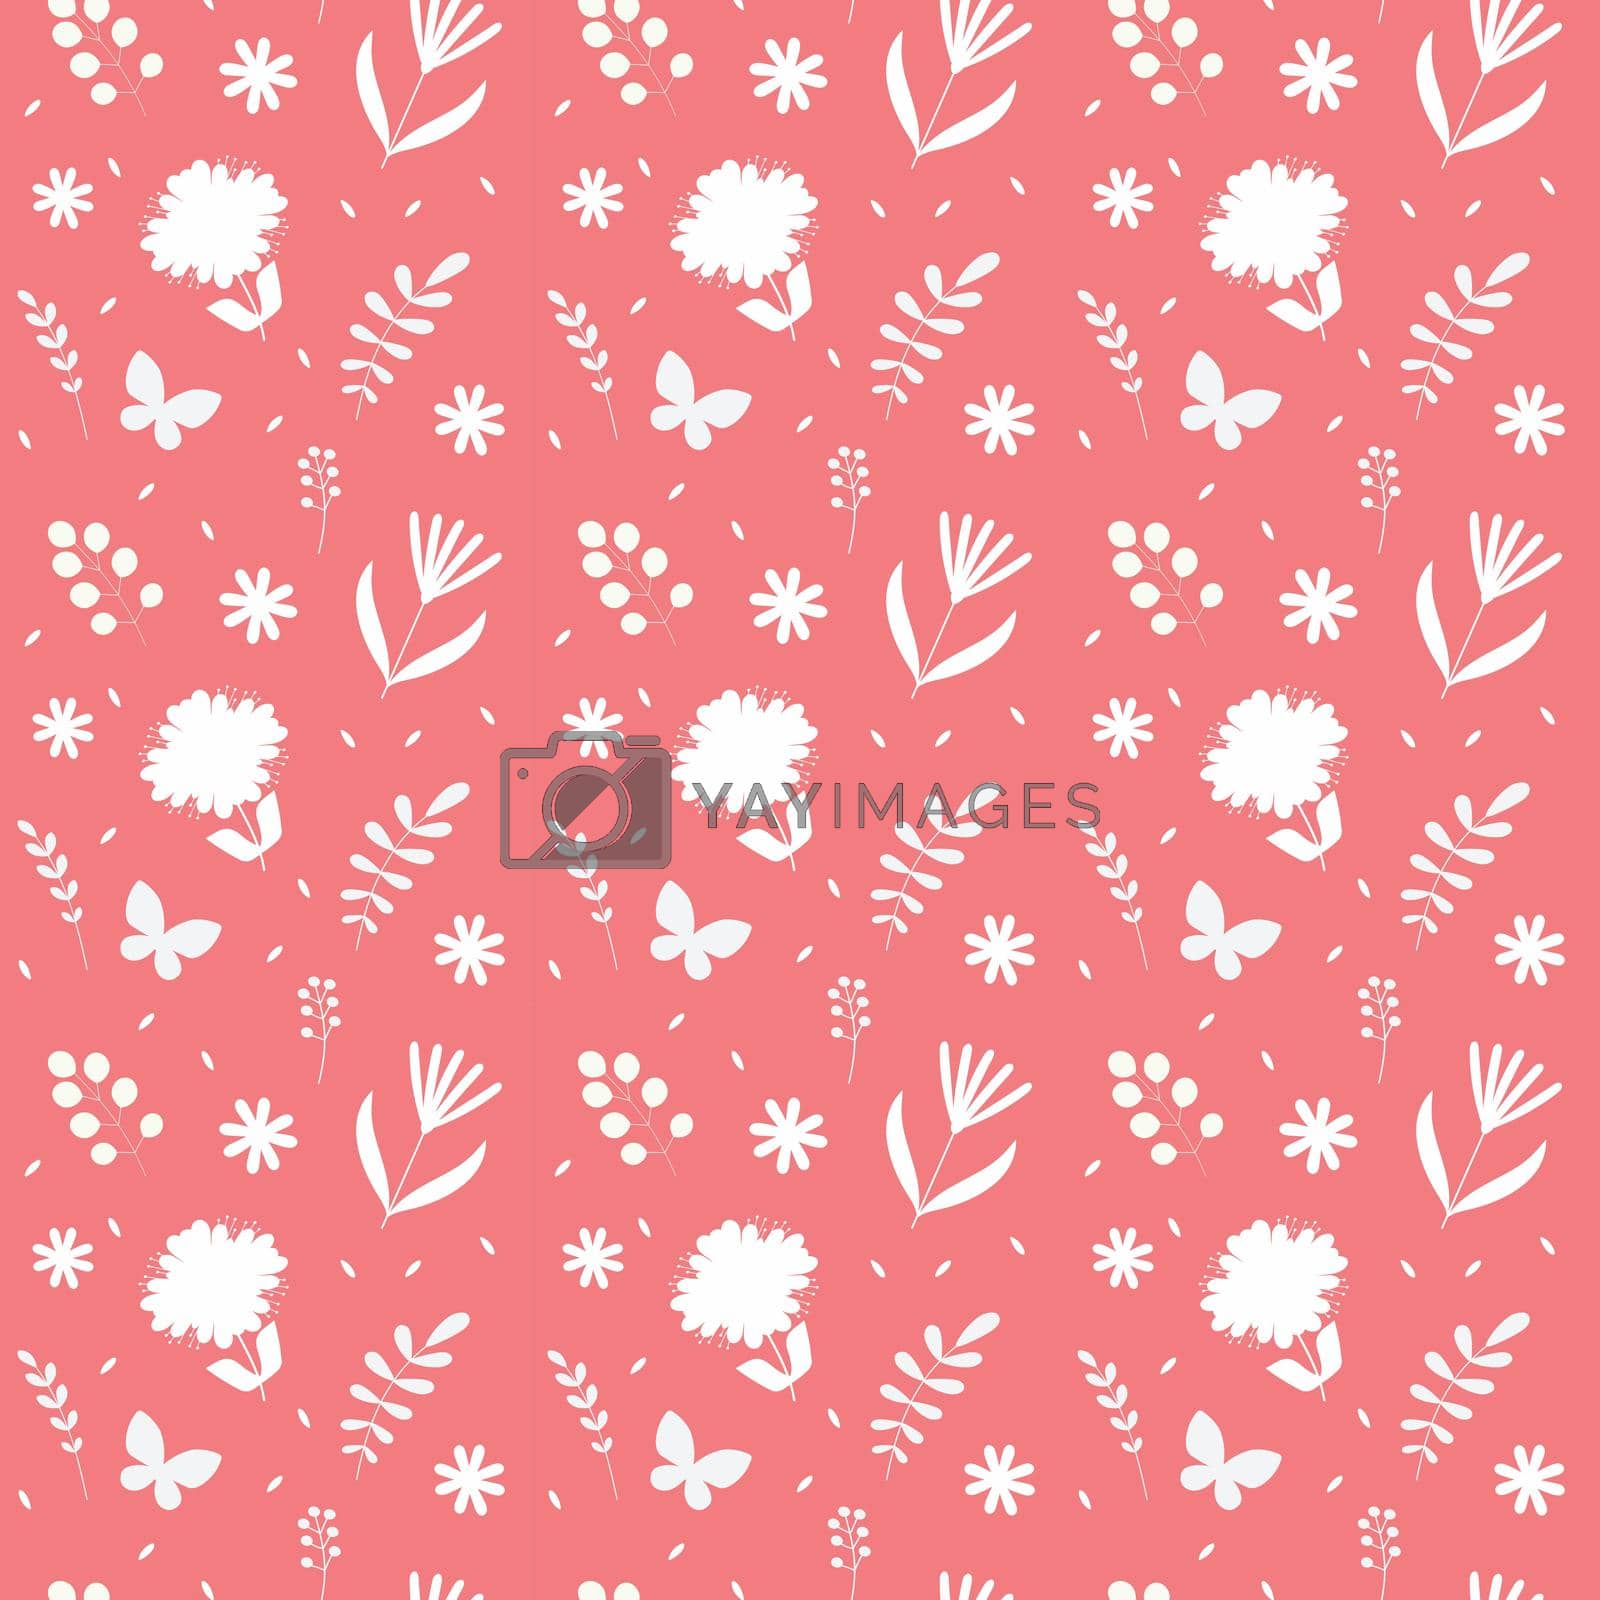 Seamless floral pattern with white flowers on red background. Modern blossom decoration with botanical ornament